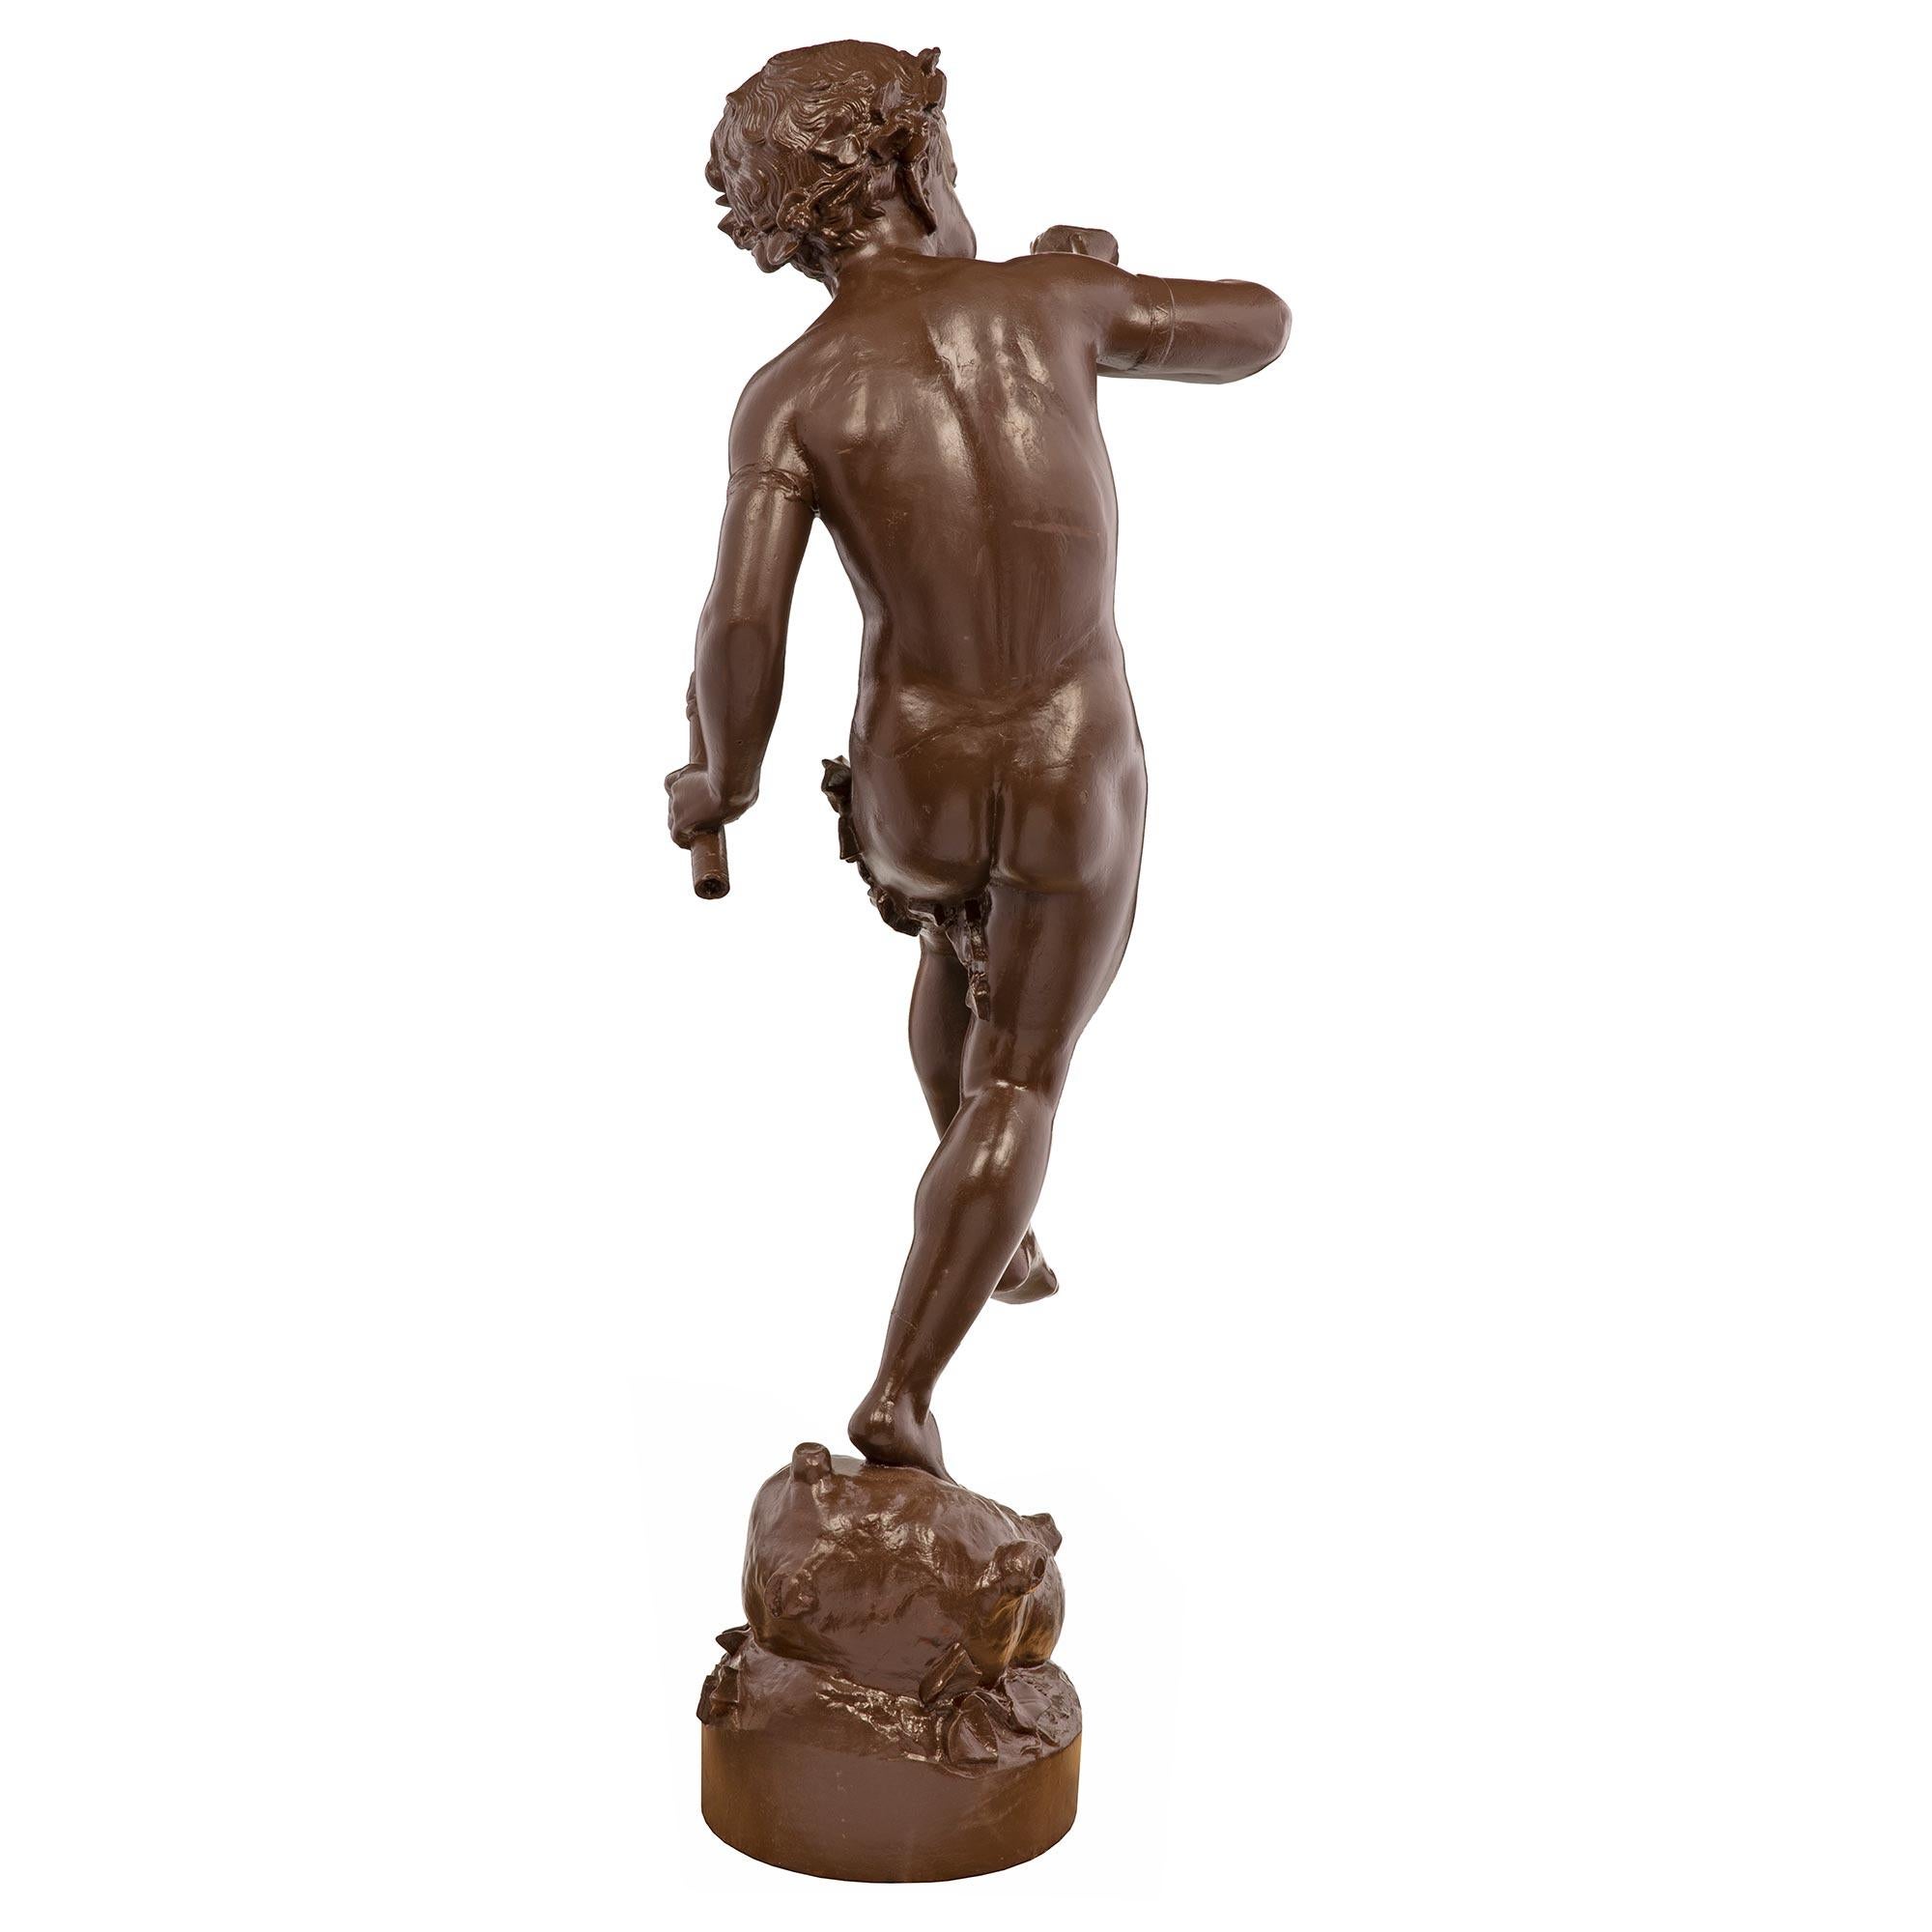 French 19th Century Cast Iron Statue of a Young Boy, Signed ‘A. DURENNE, Paris’ For Sale 2